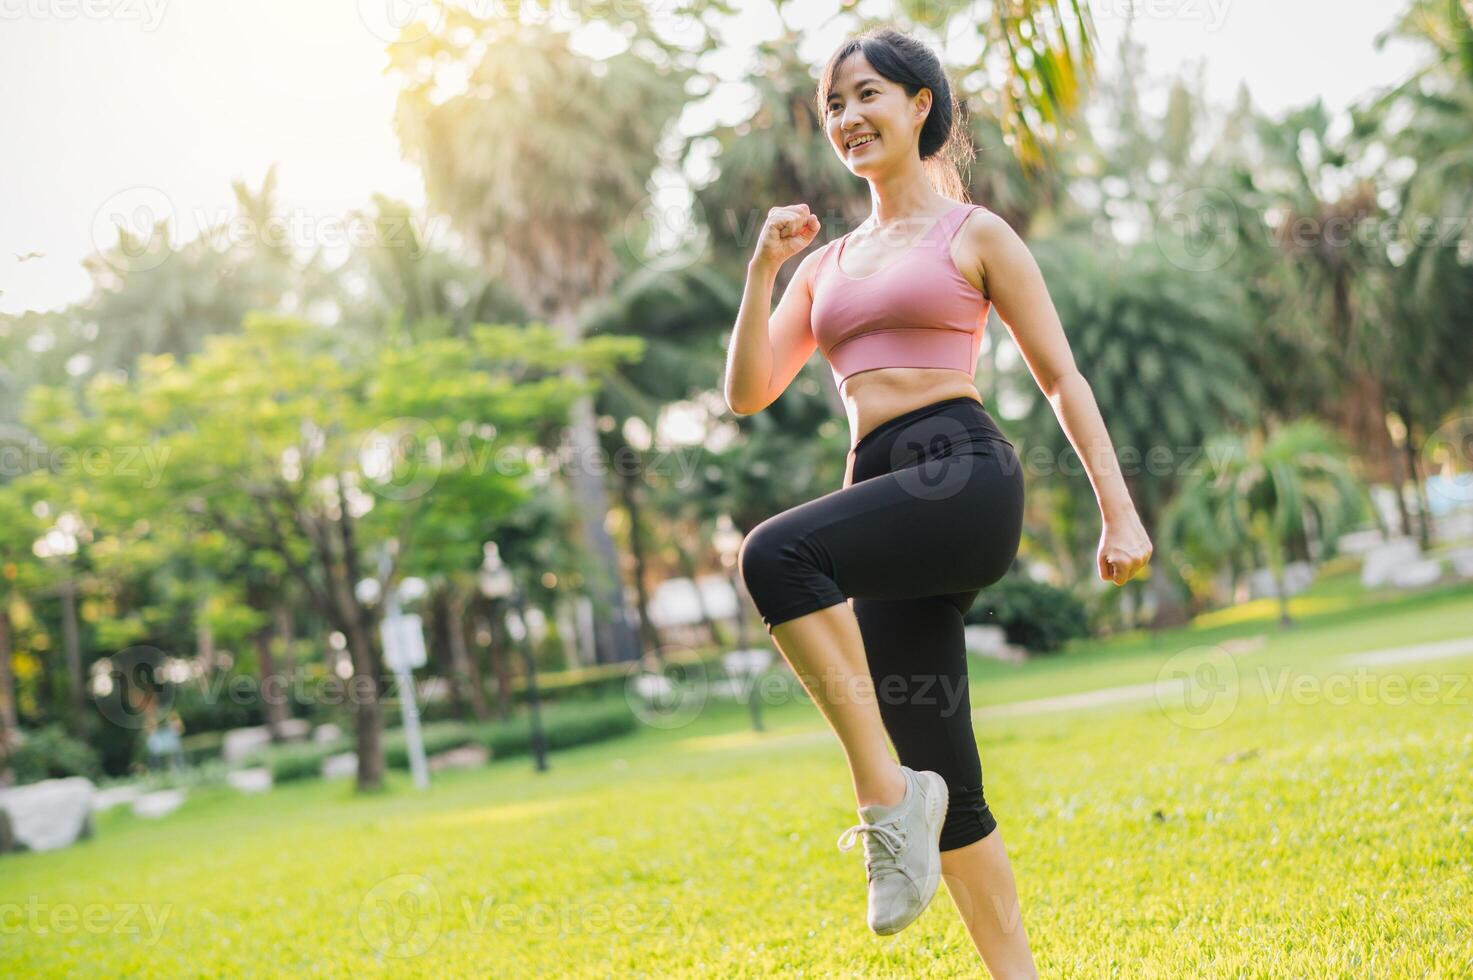 Immerse yourself in concept of wellness and well-being. fit Asian woman in 30s, wearing pink sportswear, exercising in public park at sunset. inspiring display of a healthy outdoor lifestyle. photo